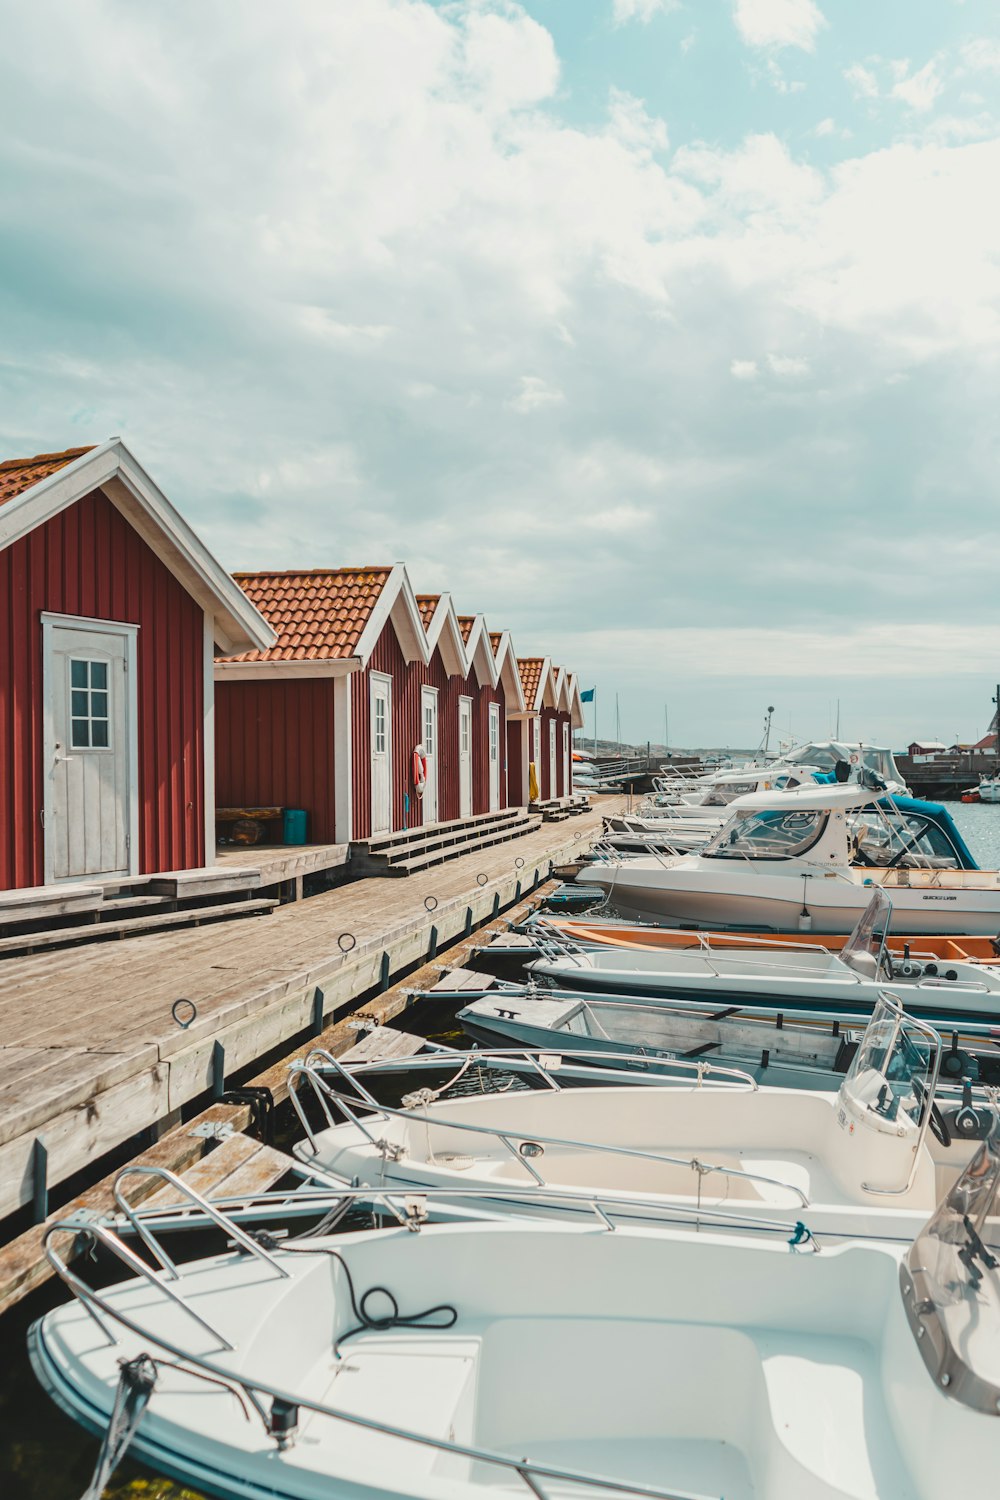 red and white wooden houses near body of water during daytime